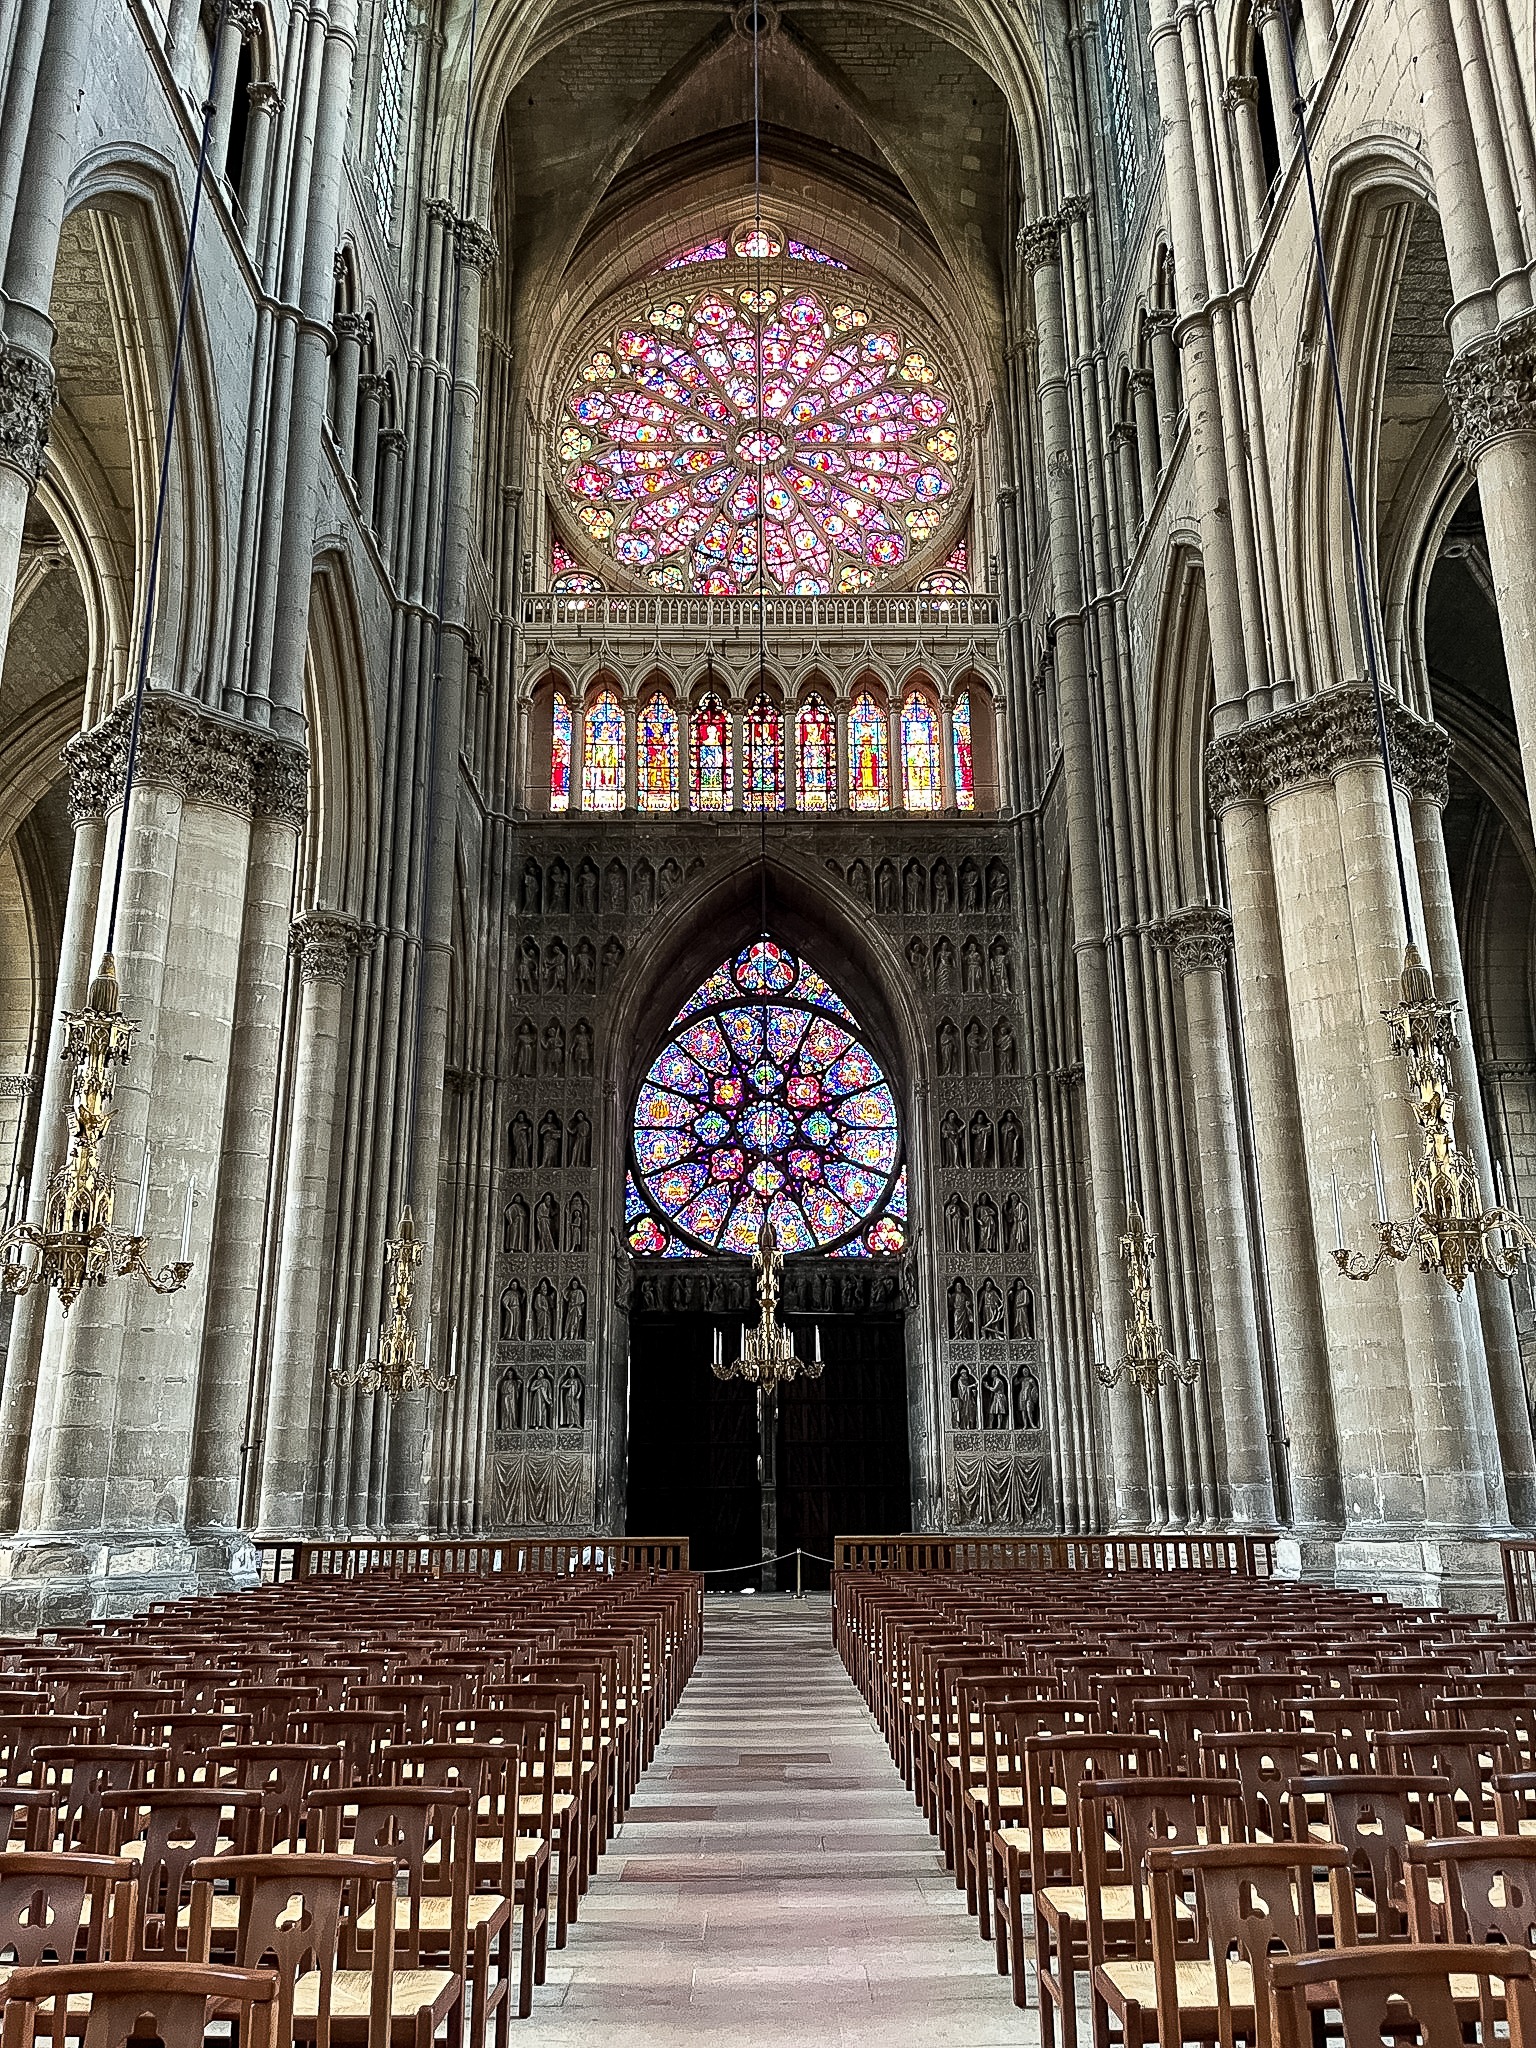 stained glass window inside reims cathedral